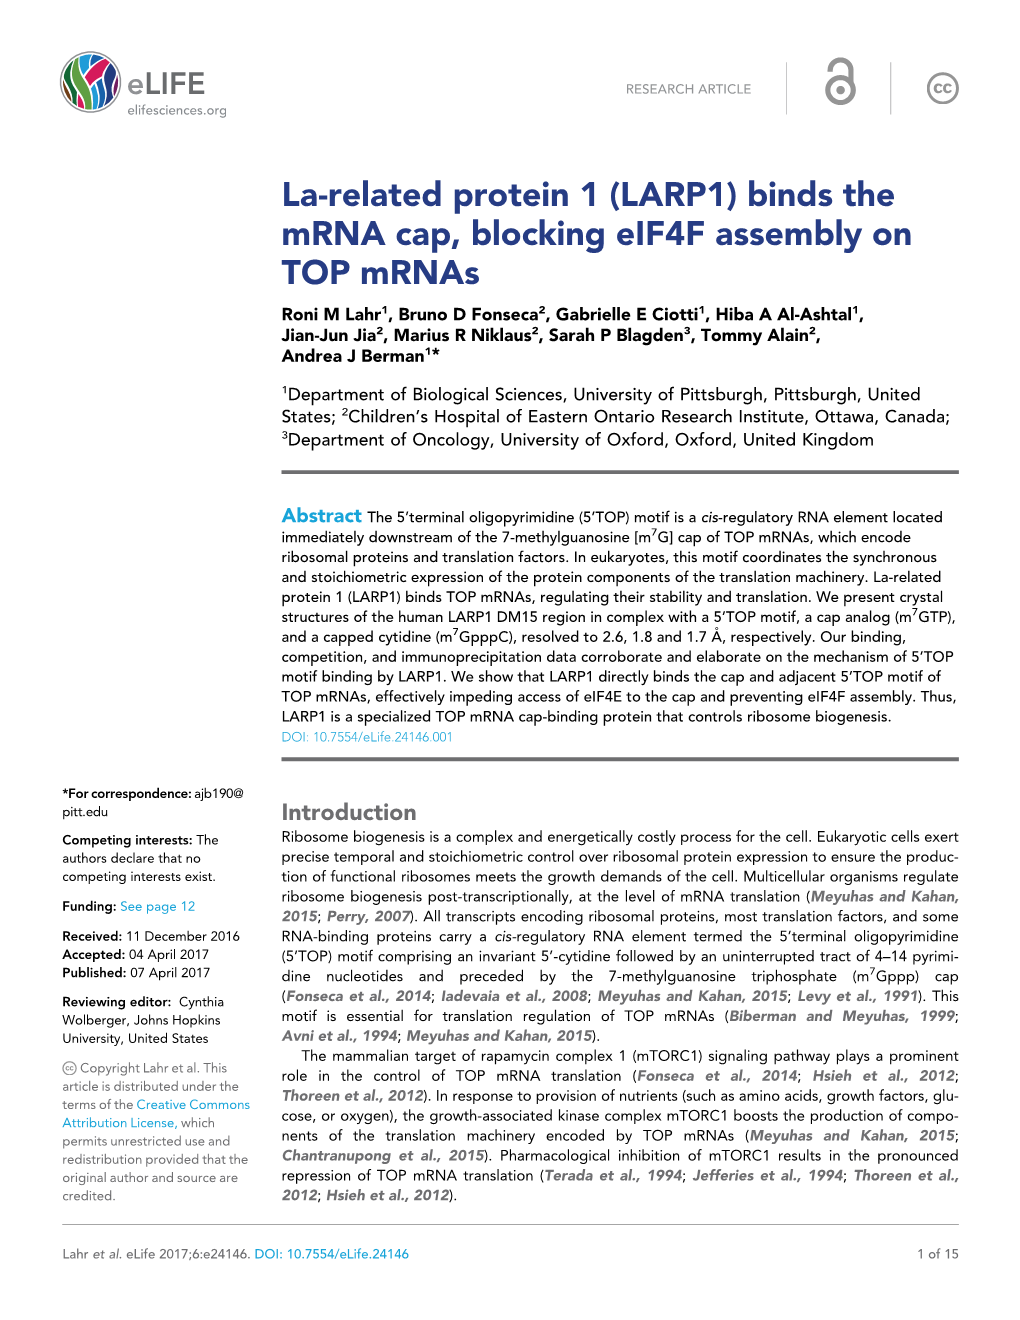 La-Related Protein 1 (LARP1) Binds the Mrna Cap, Blocking Eif4f Assembly on TOP Mrnas